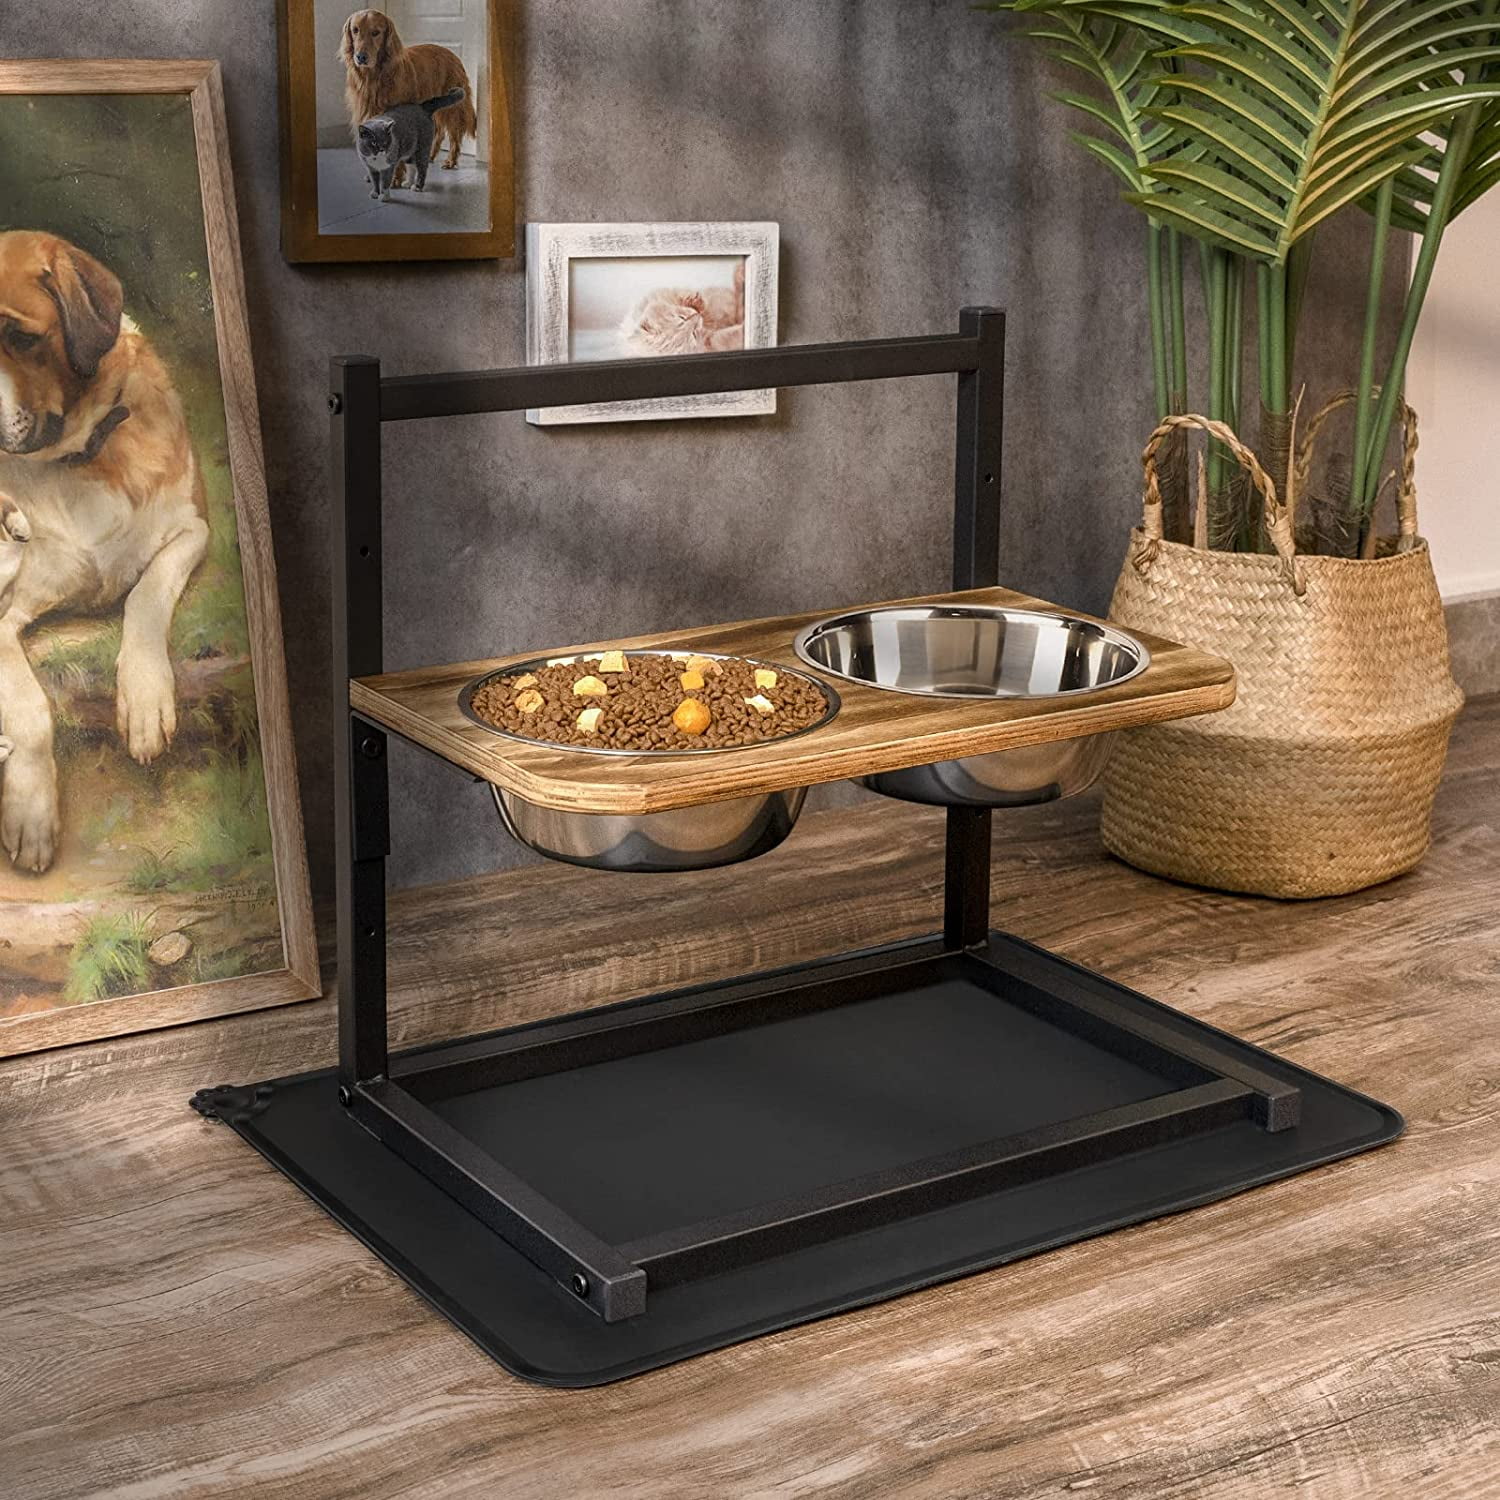 Buy Siooko Elevated Dog Bowls Small Size Dogs, Wood Raised Dog